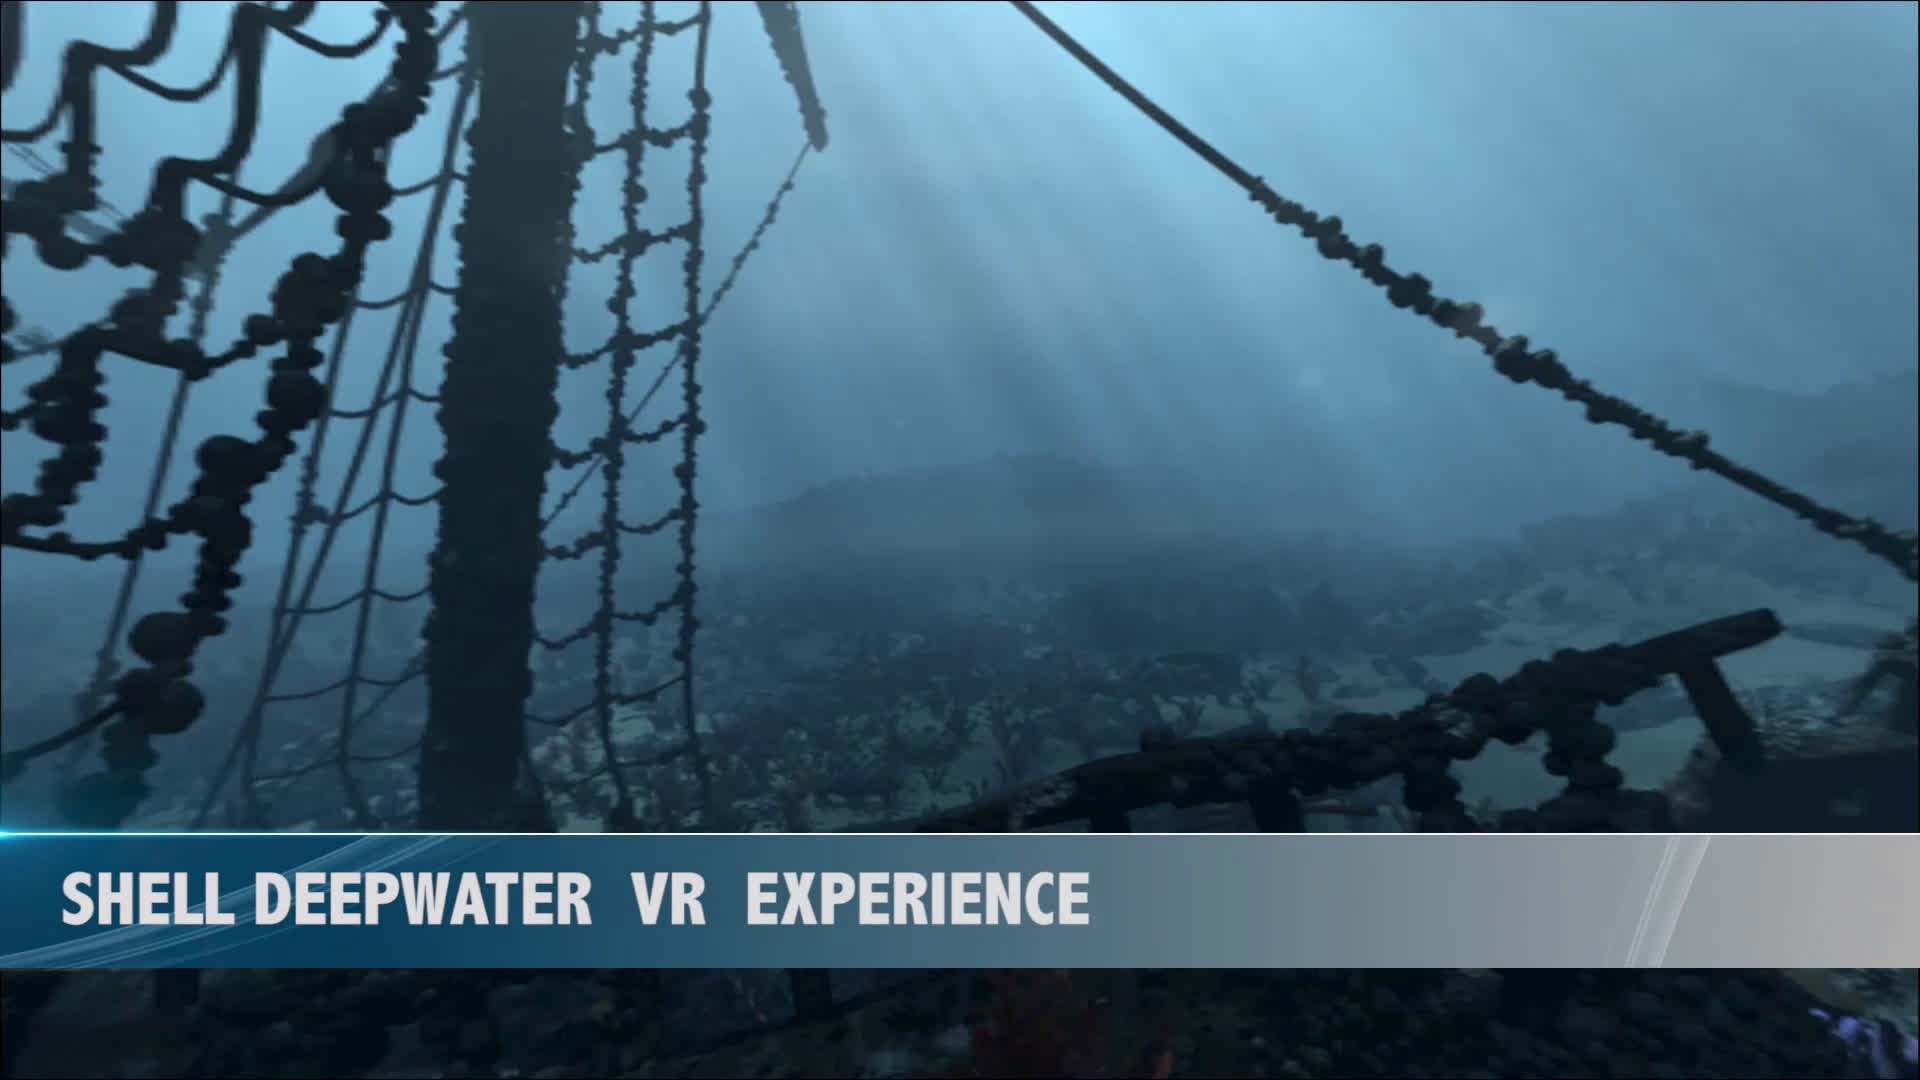 Shell Deepwater VR Experience